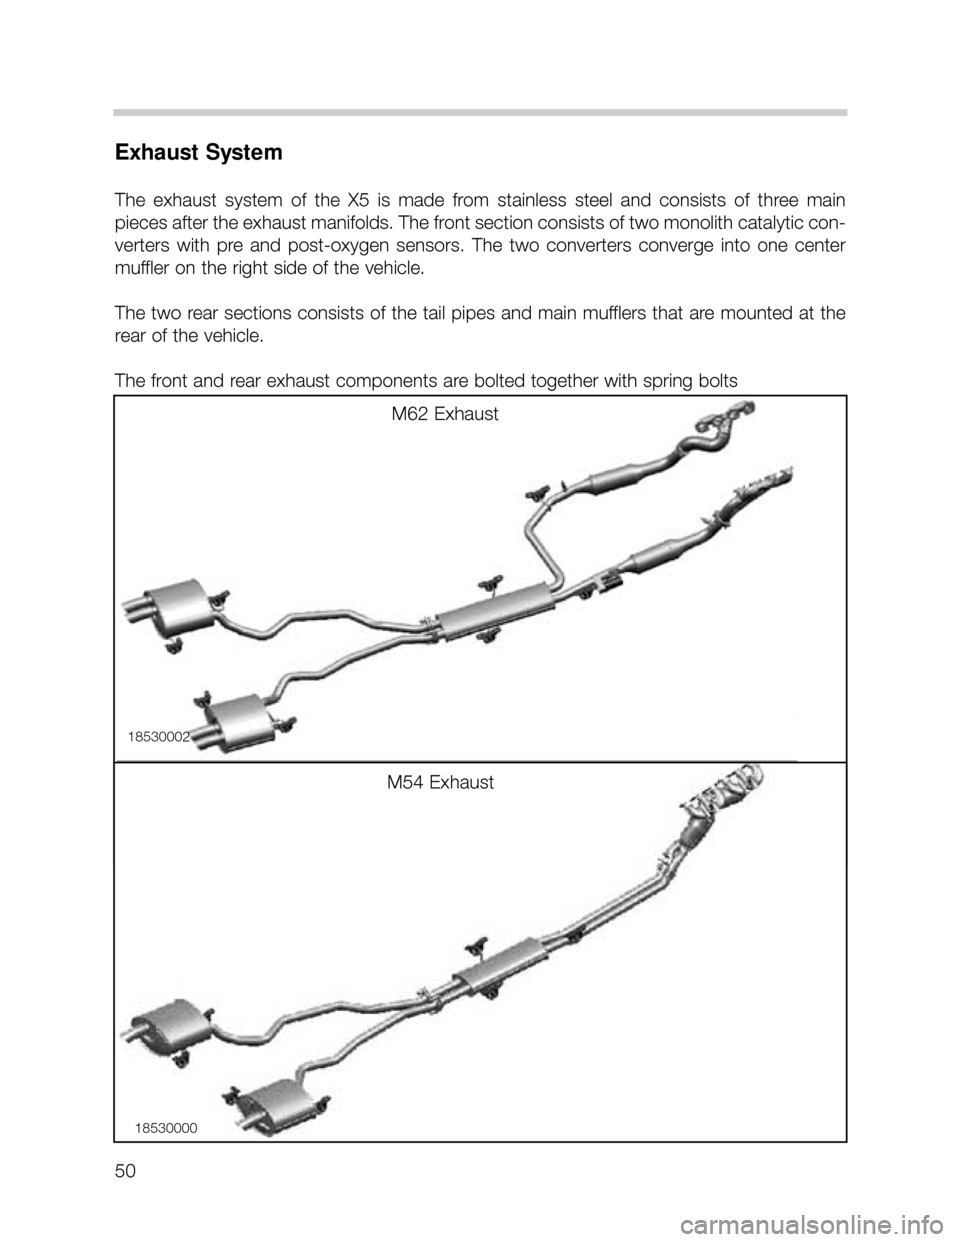 BMW X5 1999 E53 Workshop Manual 50
Exhaust System
The  exhaust  system  of  the  X5  is  made  from  stainless  steel  and  consists  of  three  main
pieces after the exhaust manifolds. The front section consists of two monolith cat